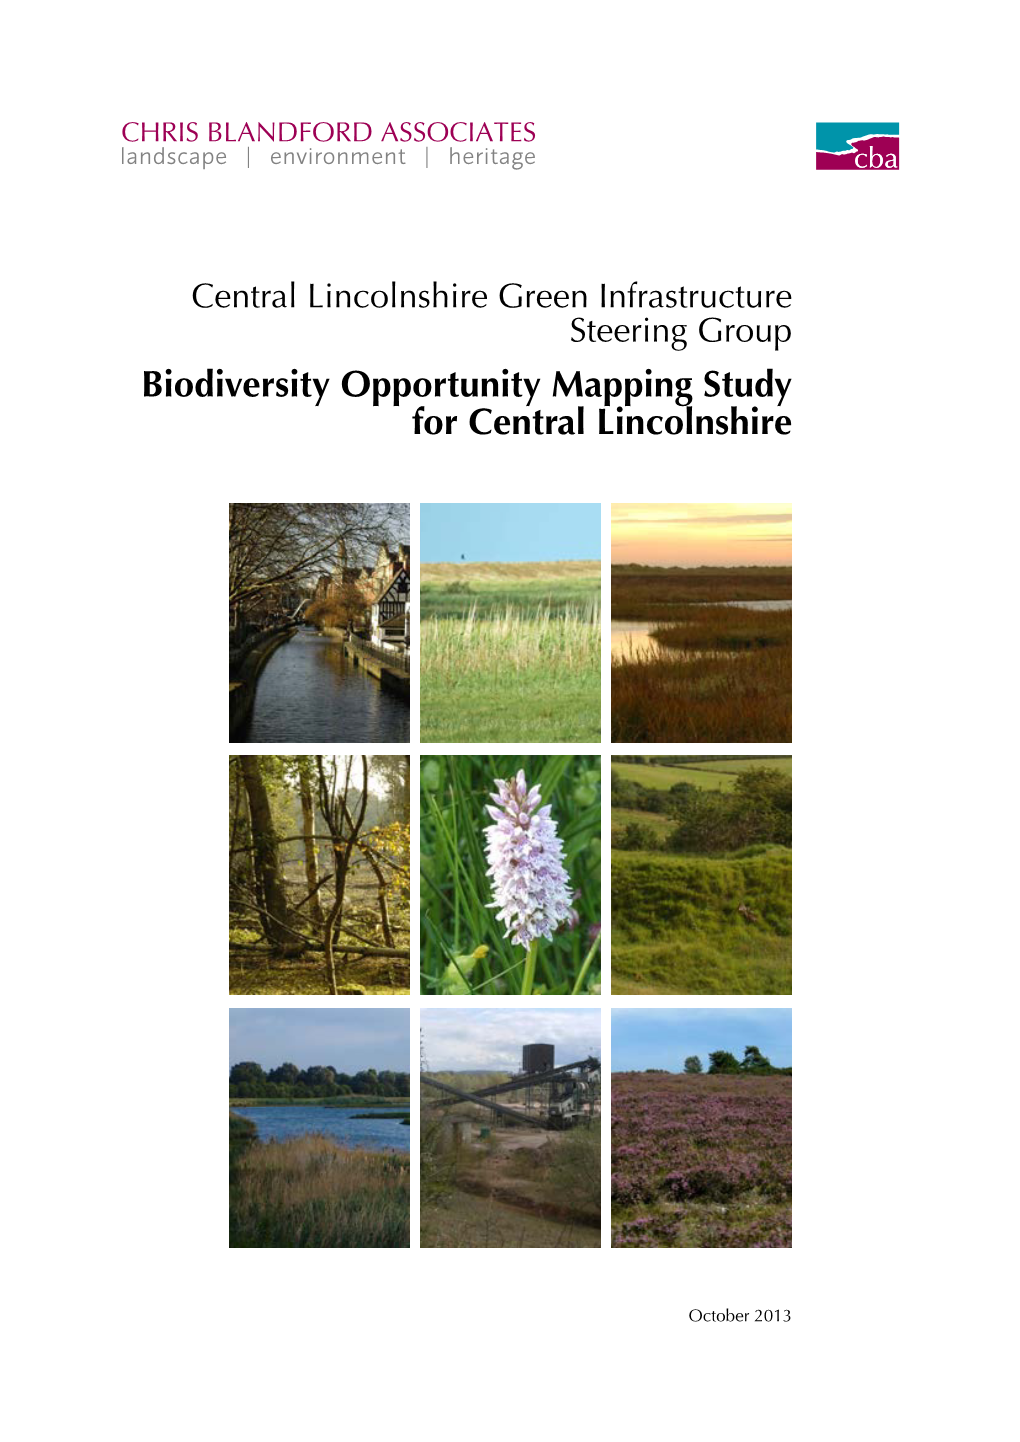 Biodiversity Opportunity Mapping Study for Central Lincolnshire